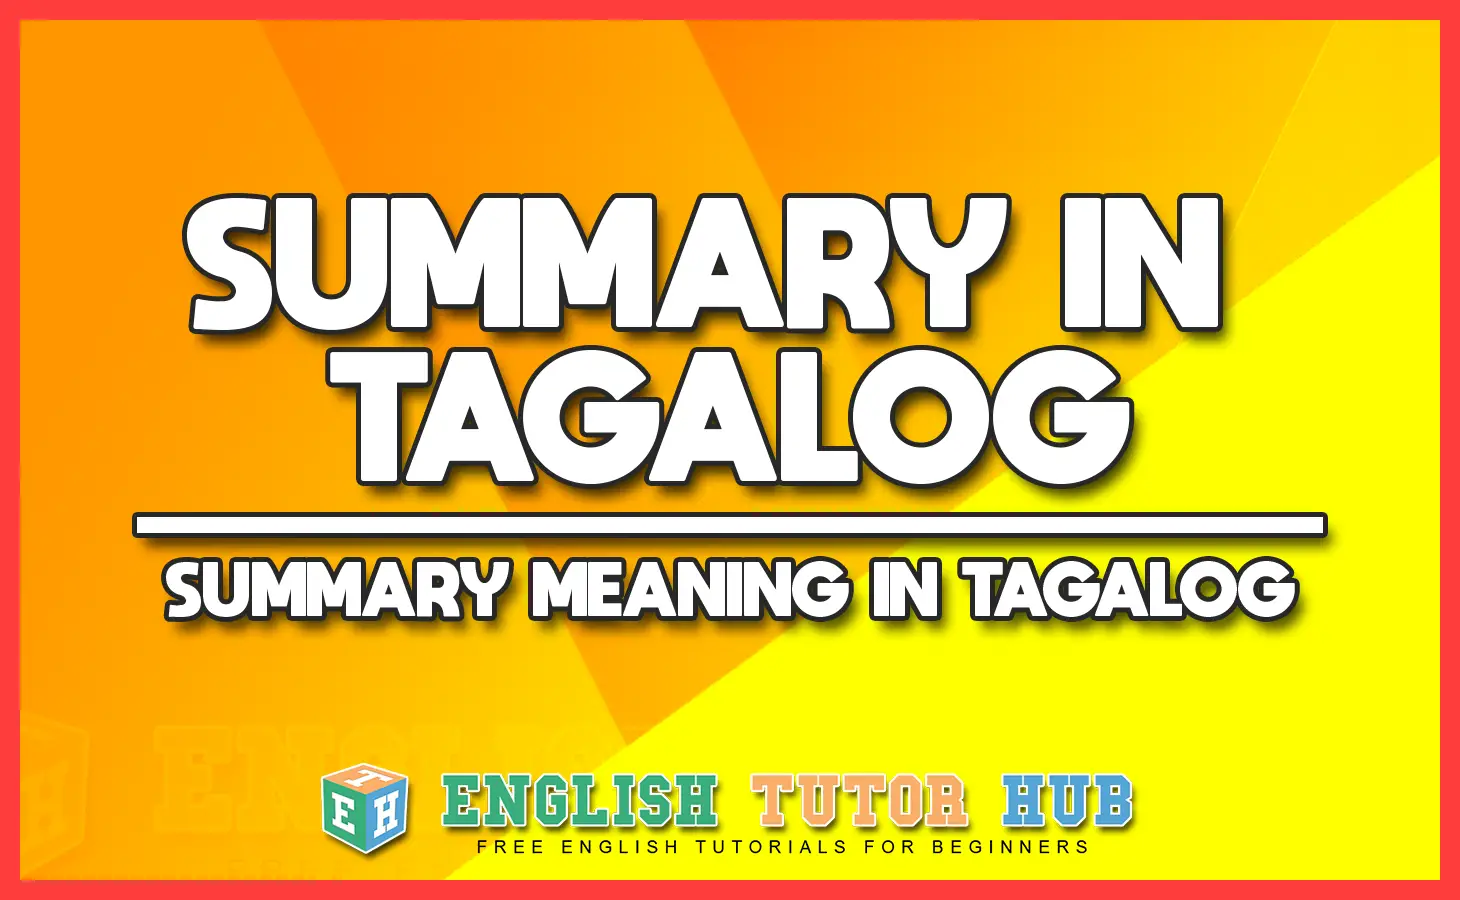 case study in tagalog translate